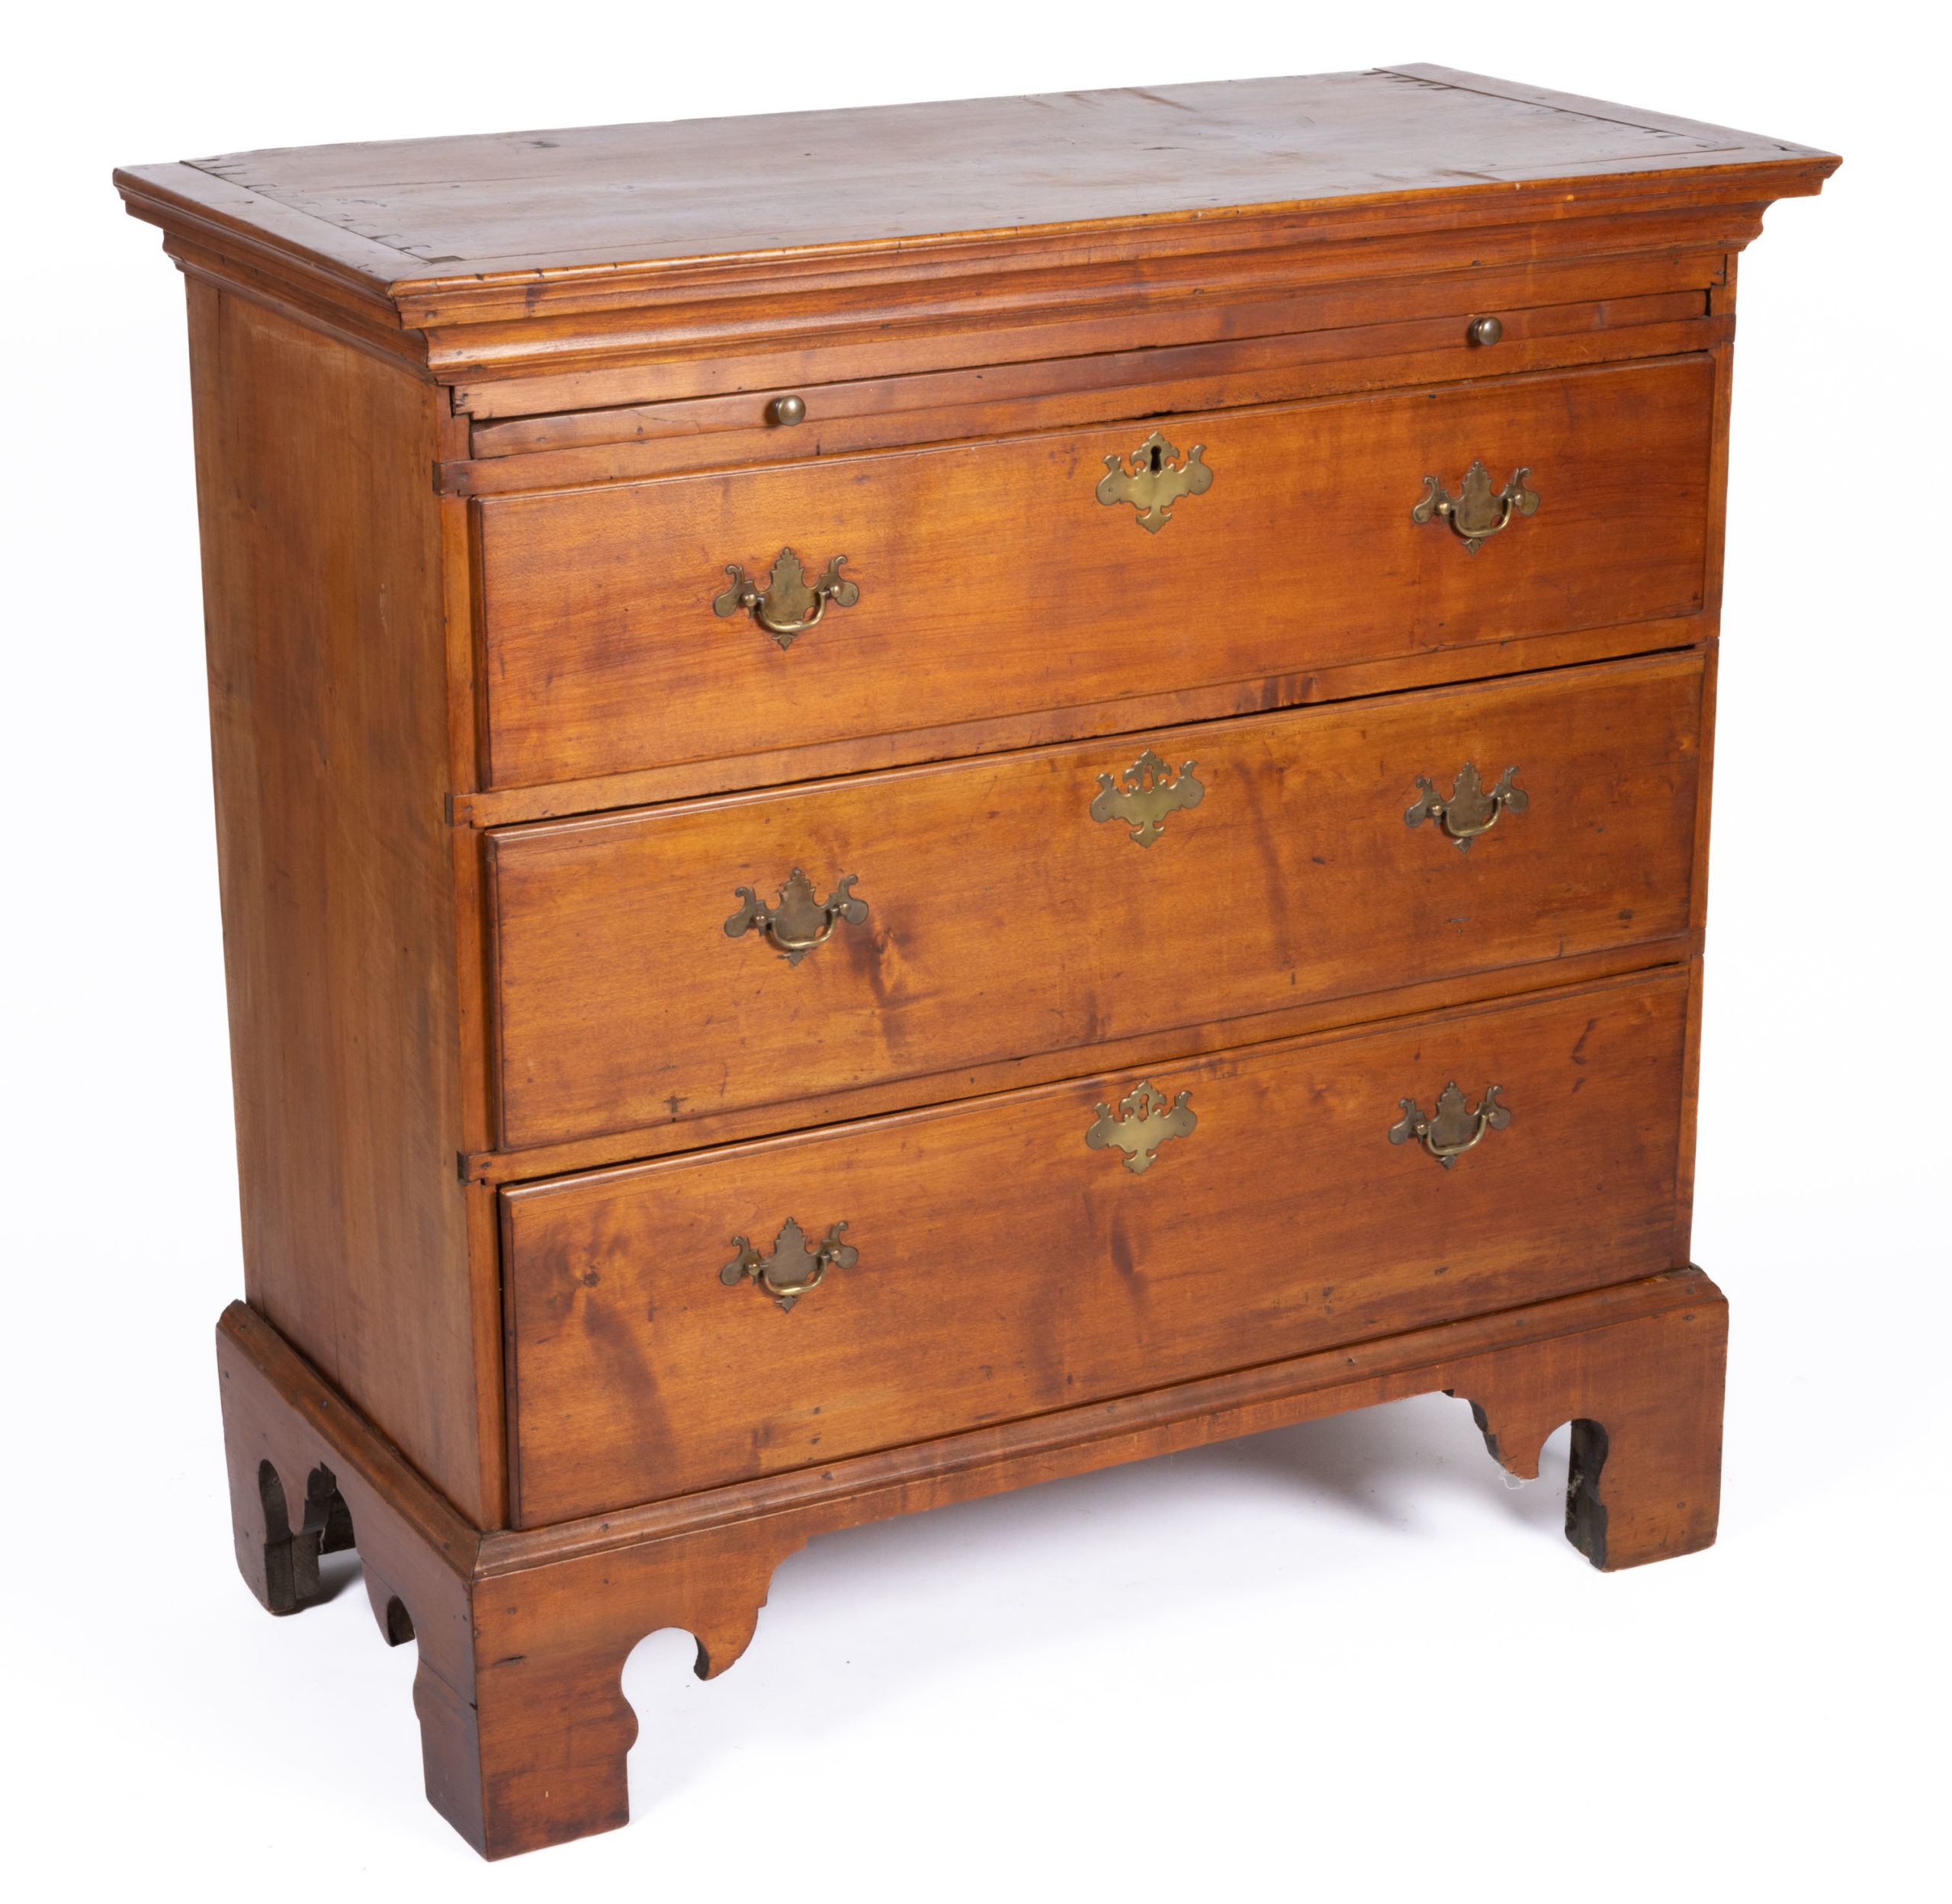 NEW ENGLAND CHIPPENDALE MAPLE BACHLEOR’S CHEST OF DRAWERS,